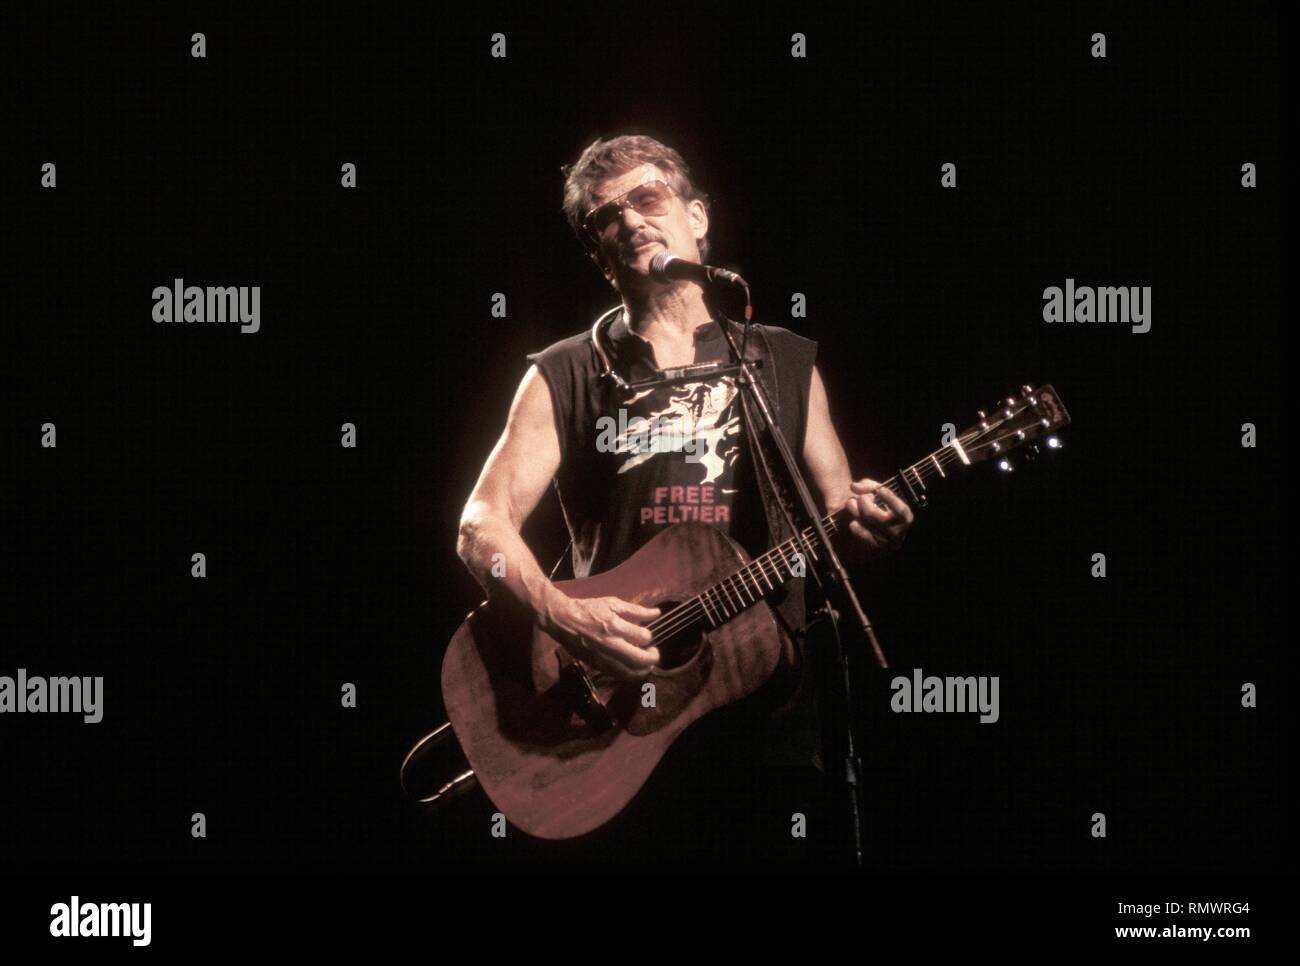 Singer, songwriter, actor, and writer Kris Kristofferson is performing on stage during a 'live' concert appearance. Stock Photo